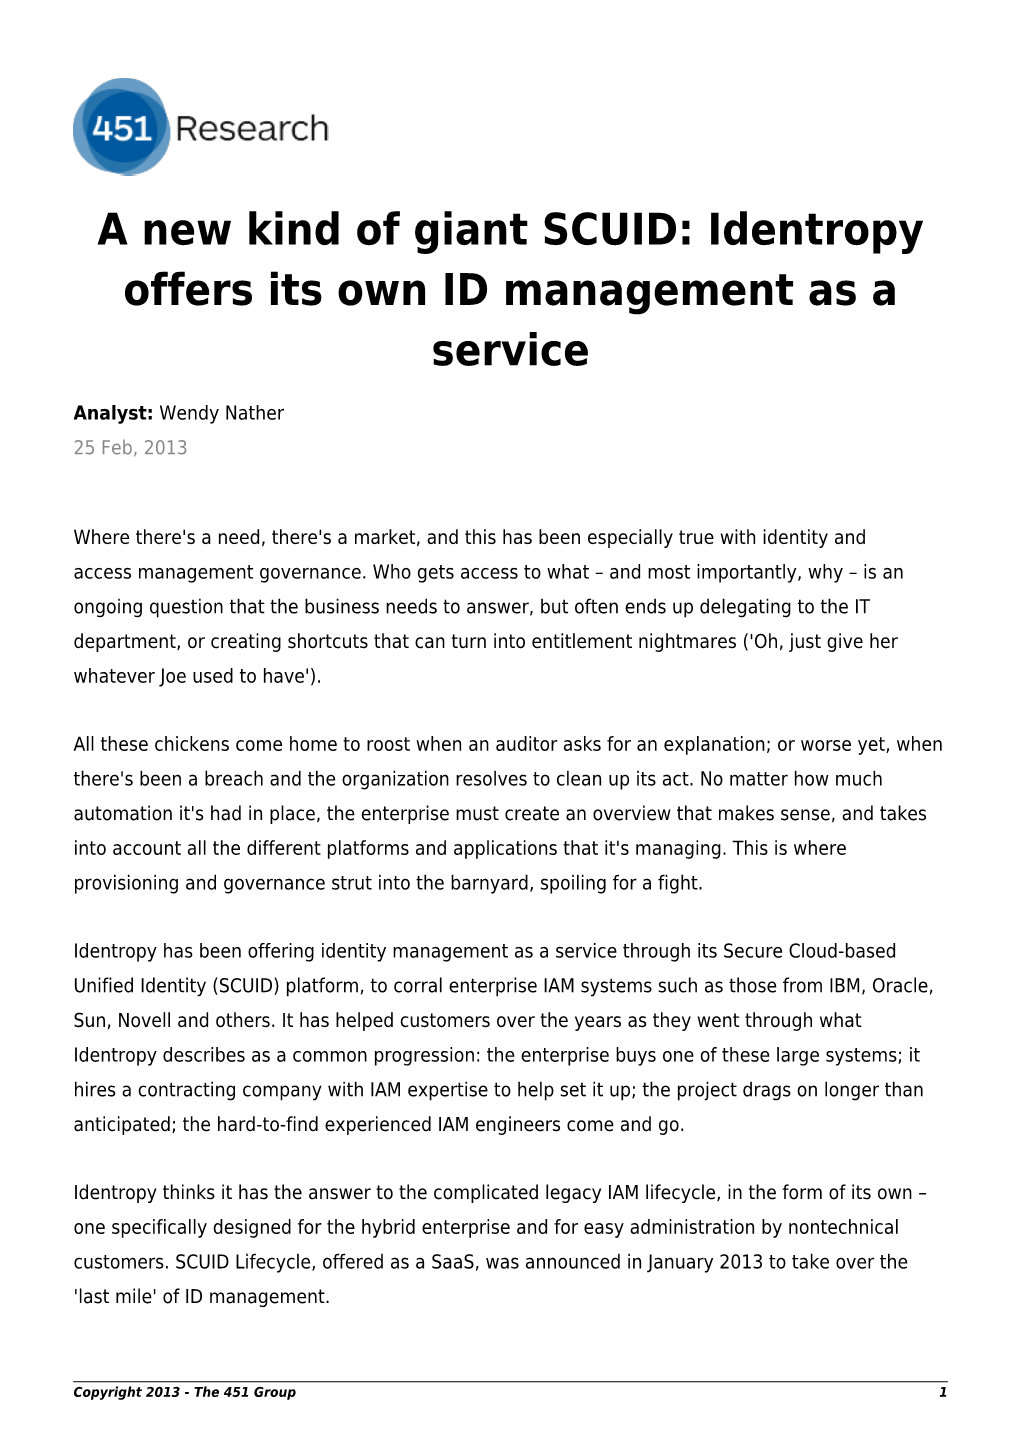 A New Kind of Giant SCUID: Identropy Offers Its Own ID Management As a Service